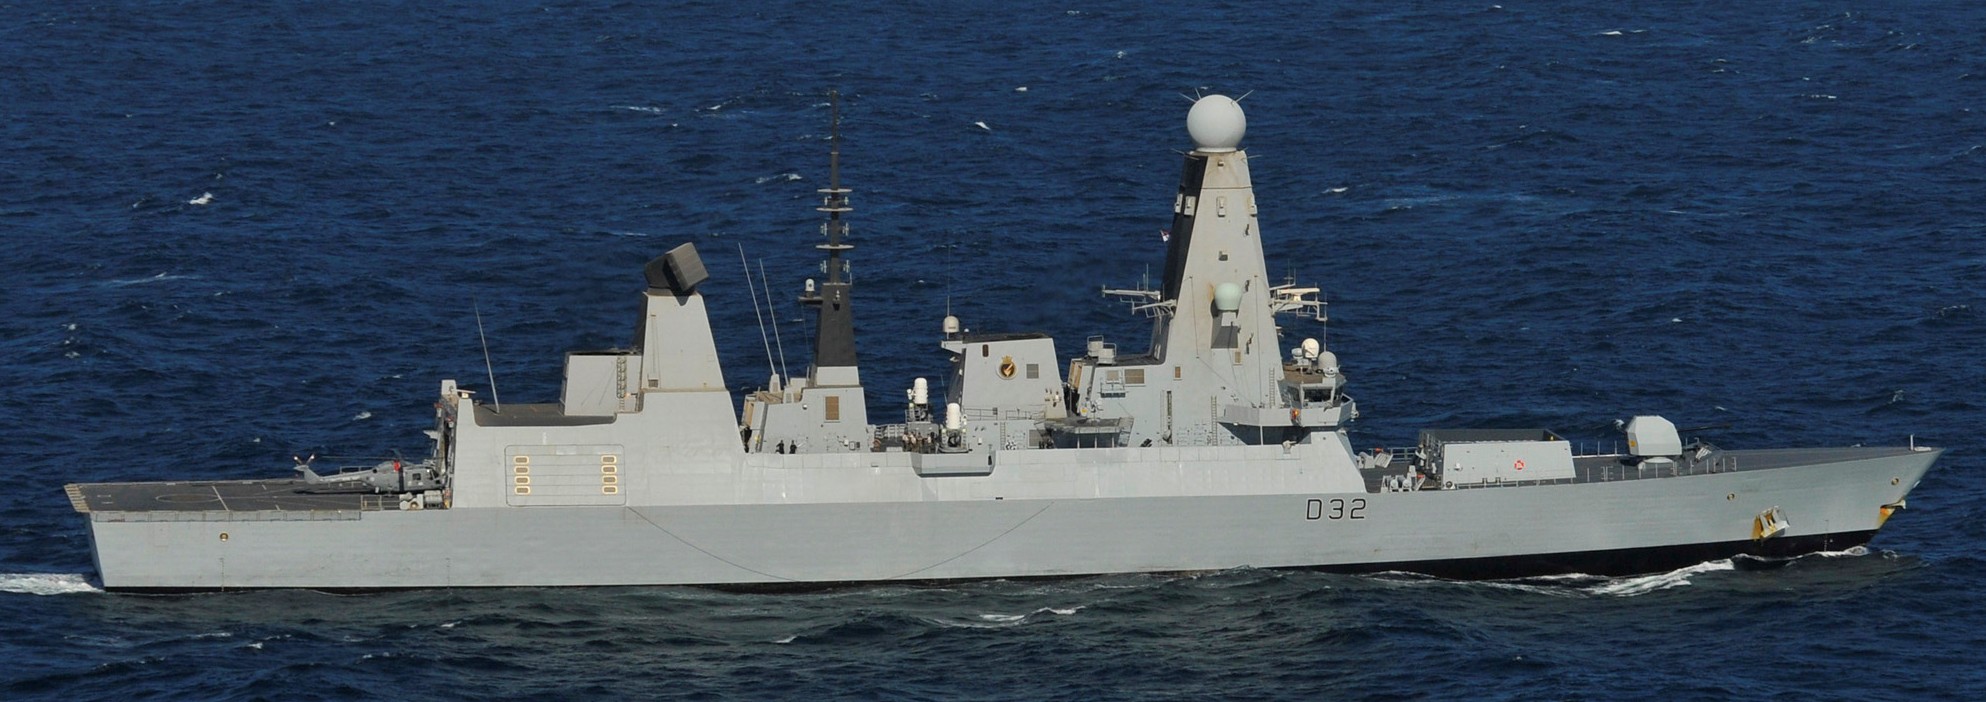 hms daring d-32 type 45 class guided missile destroyer royal navy sea viper paams 13